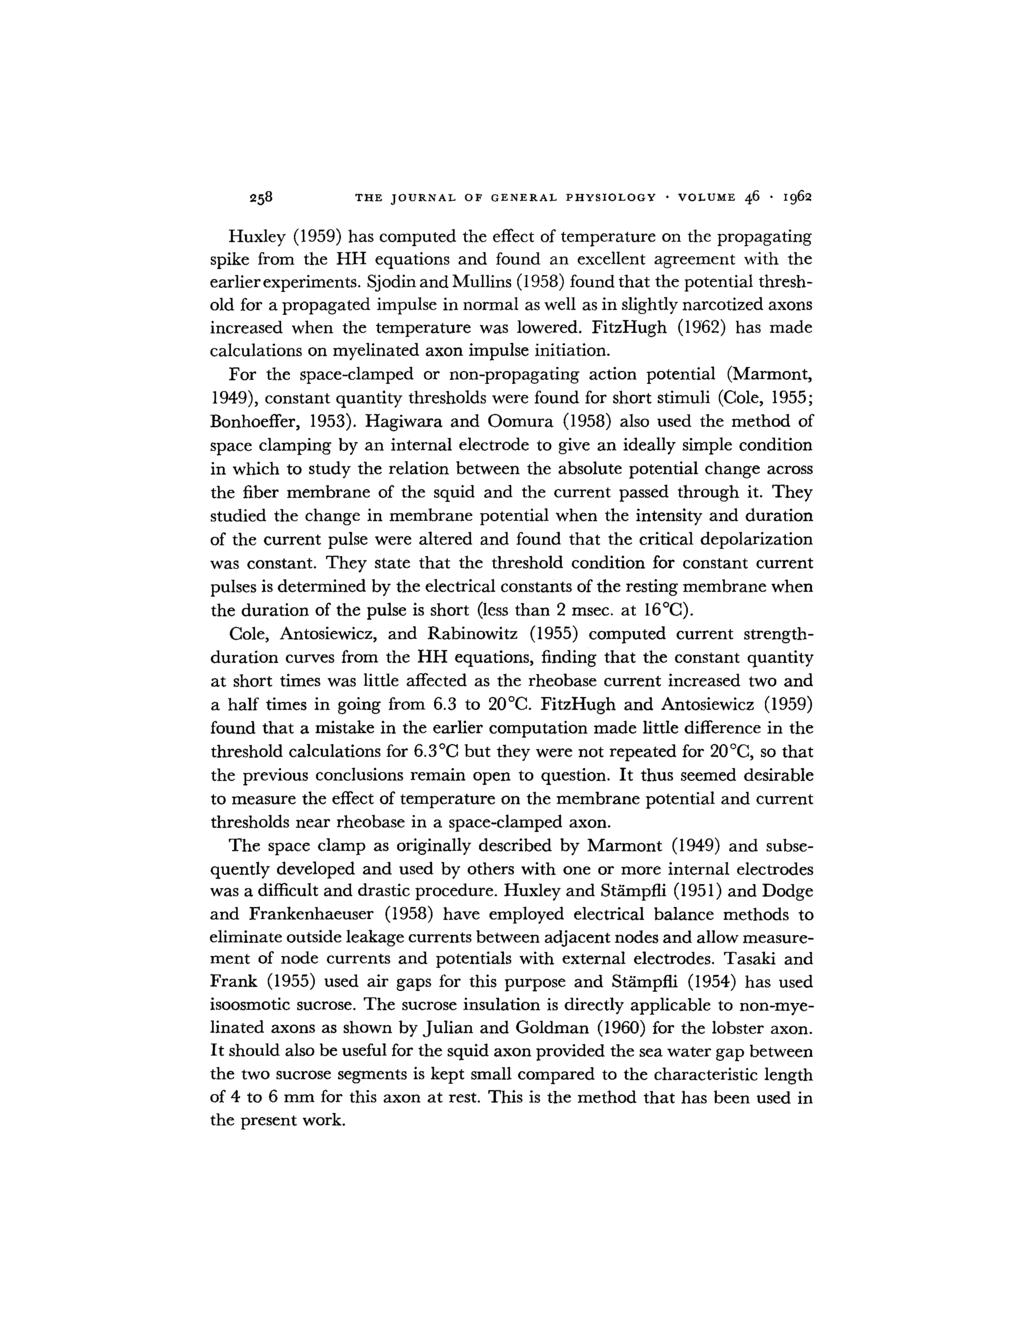 258 THE JOURNAL OF GENERAL PHYSIOLOOY VOLUME 46 i962 Huxley (1959) has computed the effect of temperature on the propagating spike from the HH equations and found an excellent agreement with the